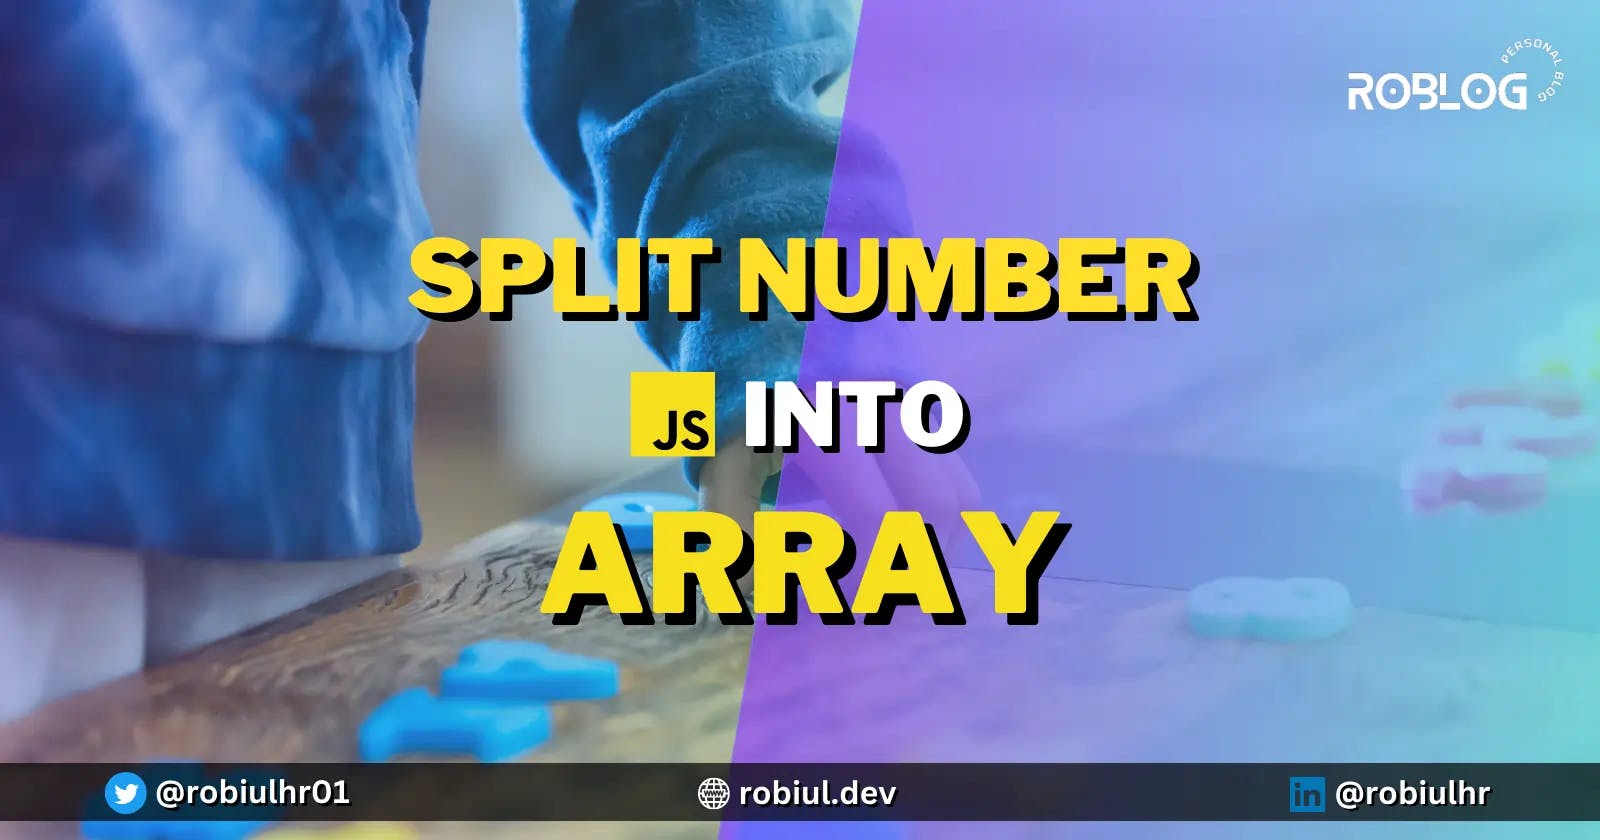 How to Split a Number into an Array in JavaScript